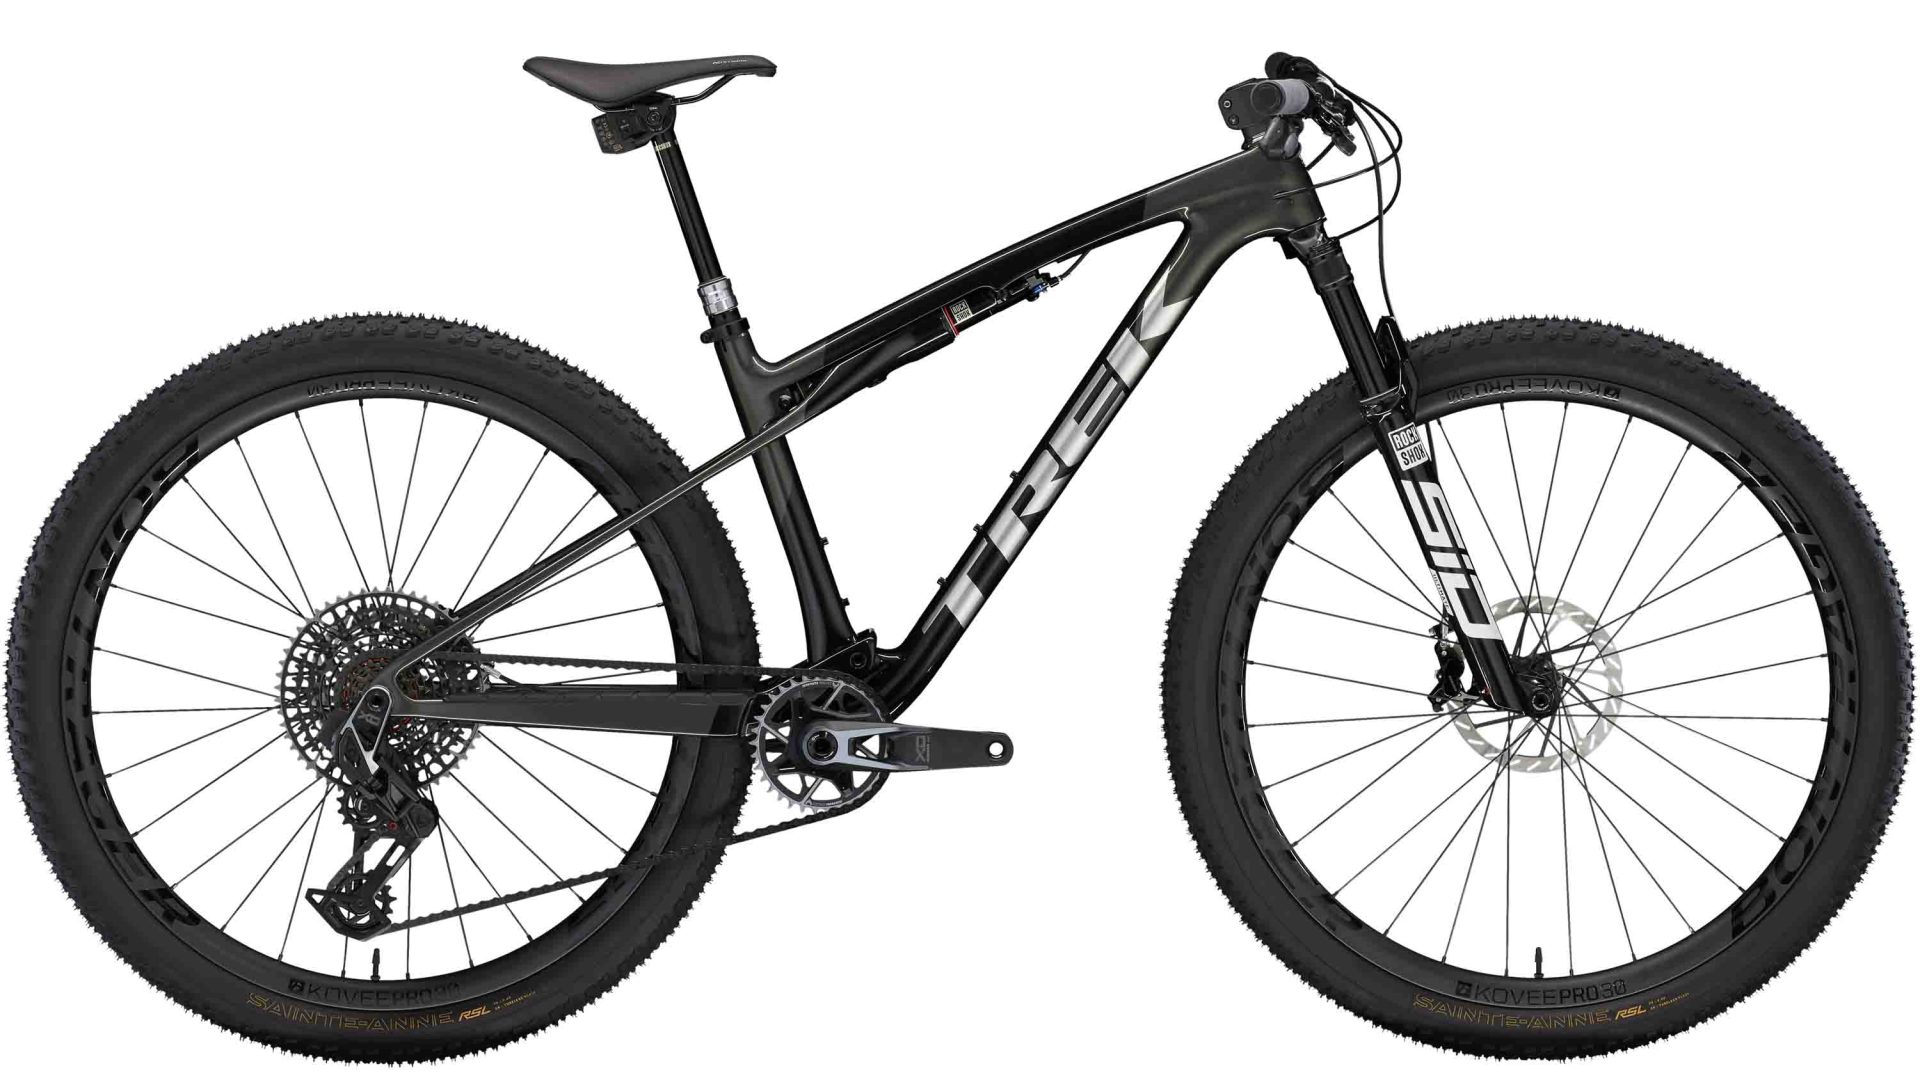 Don't have quite enough cash for the flagship model, but still want to run Transmission? There's the Supercaliber SLR 9.9 XO AXS, which swaps the SRAM XX SL stuff for the XO level groupset, Bontrager Kovee Pro 30 carbon wheels instead of the RSL ones, and a RockShox Reverb AXS dropper instead of the lighter-weight Fox Transfer SL. You also get a RockShox SID Ultimate fork instead of the lighter-weight SID SL.  Claimed weight is 11.0 kg (24.3 lb), and retail price is US$9,000. 